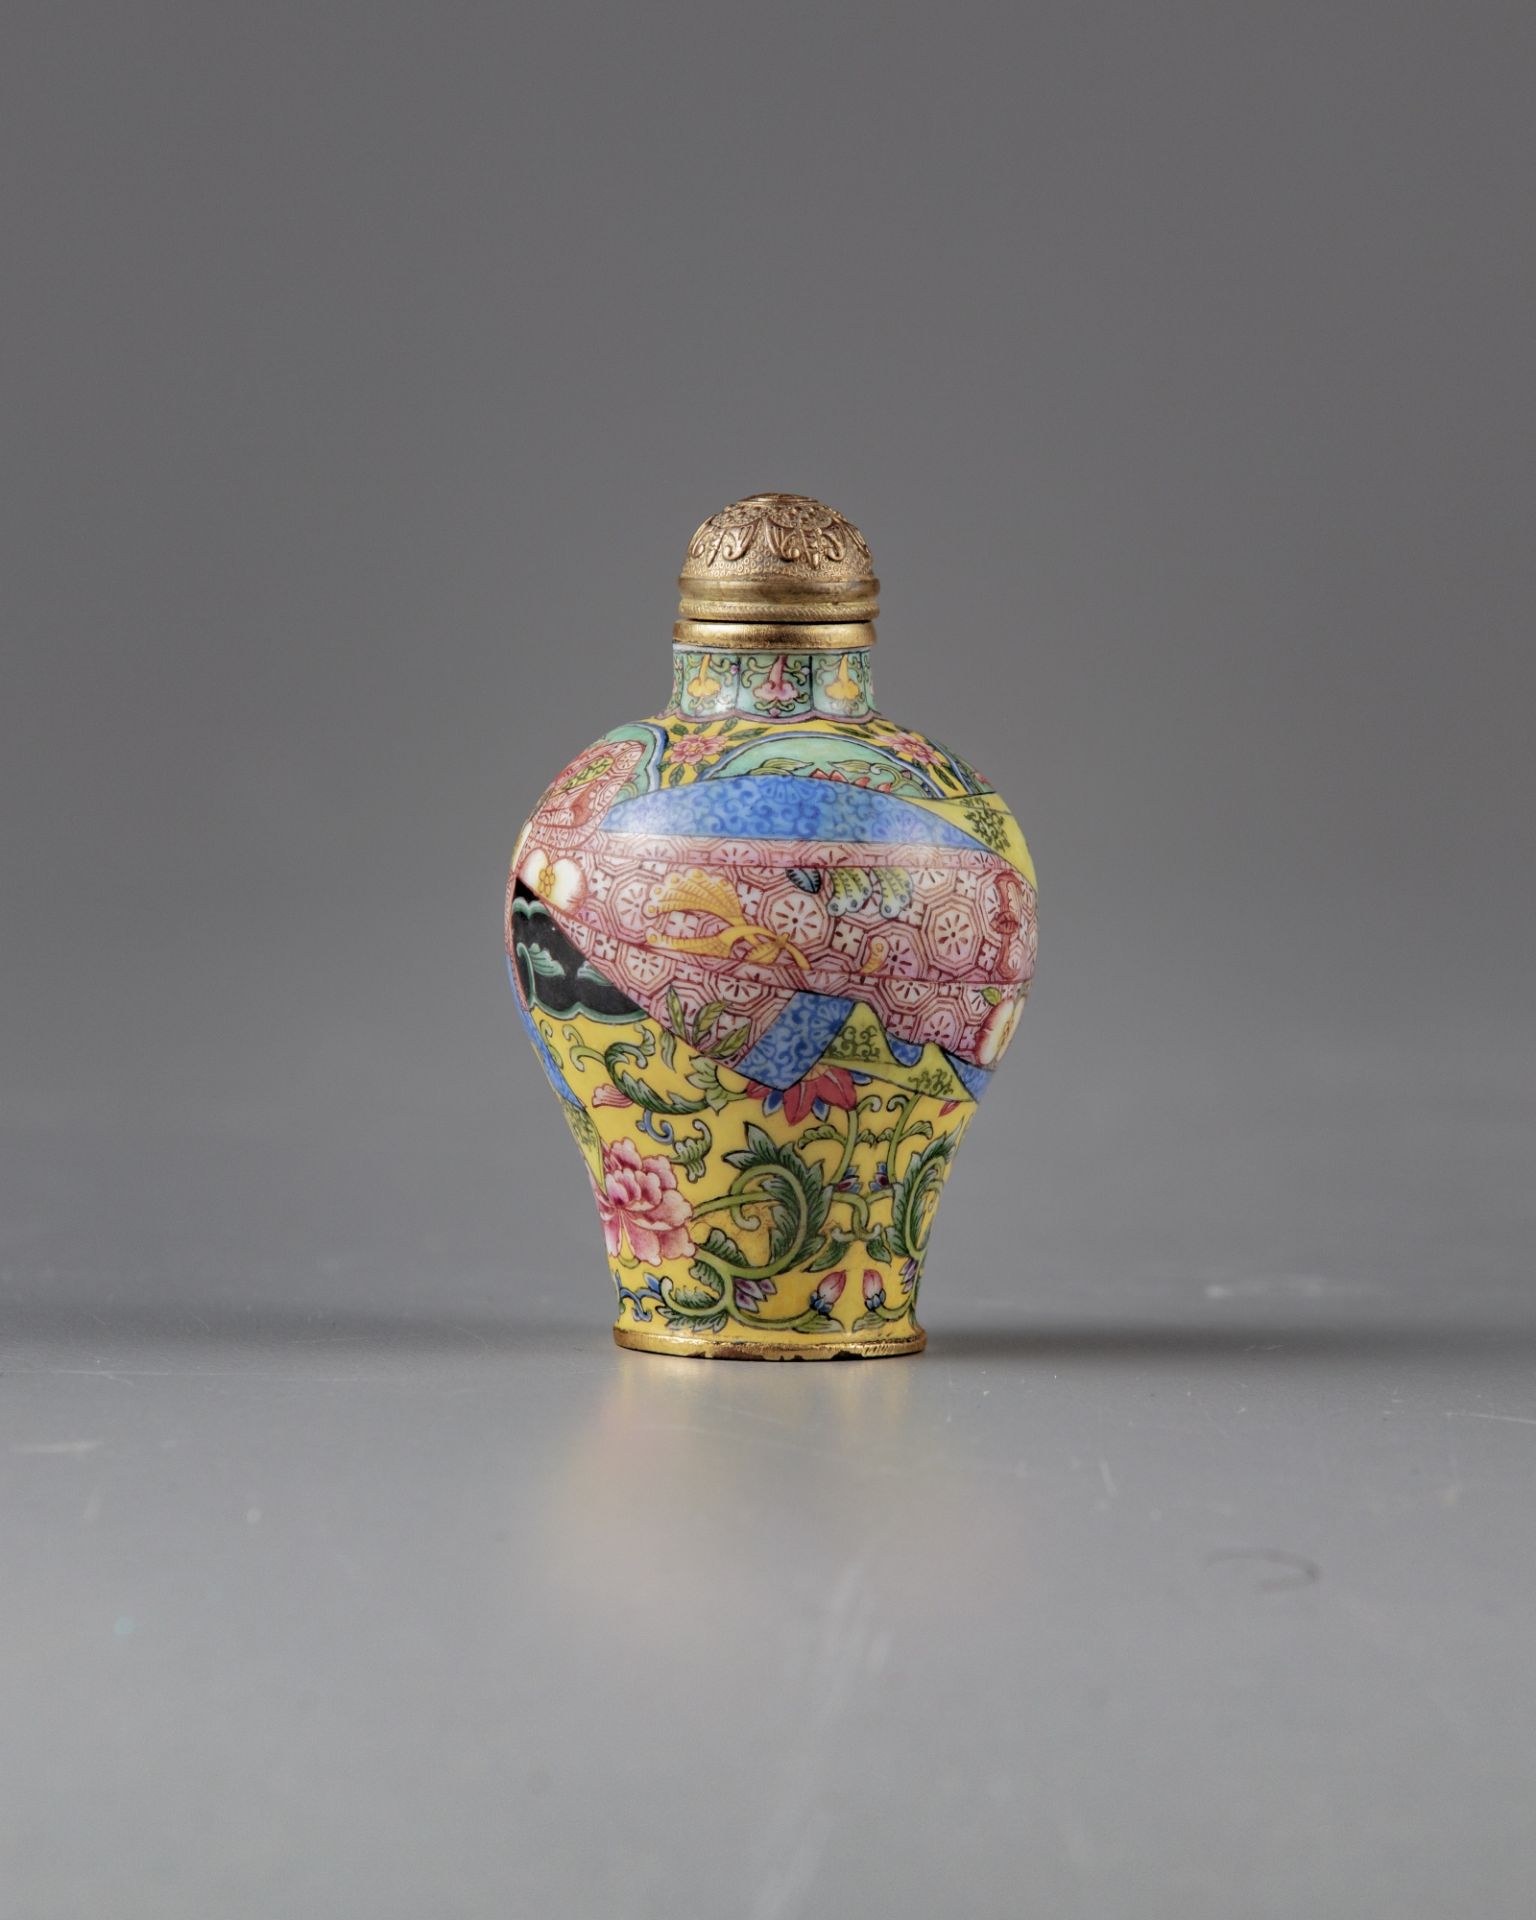 A small Chinese painted enamel trompe l'oeil snuff bottle - Image 2 of 4